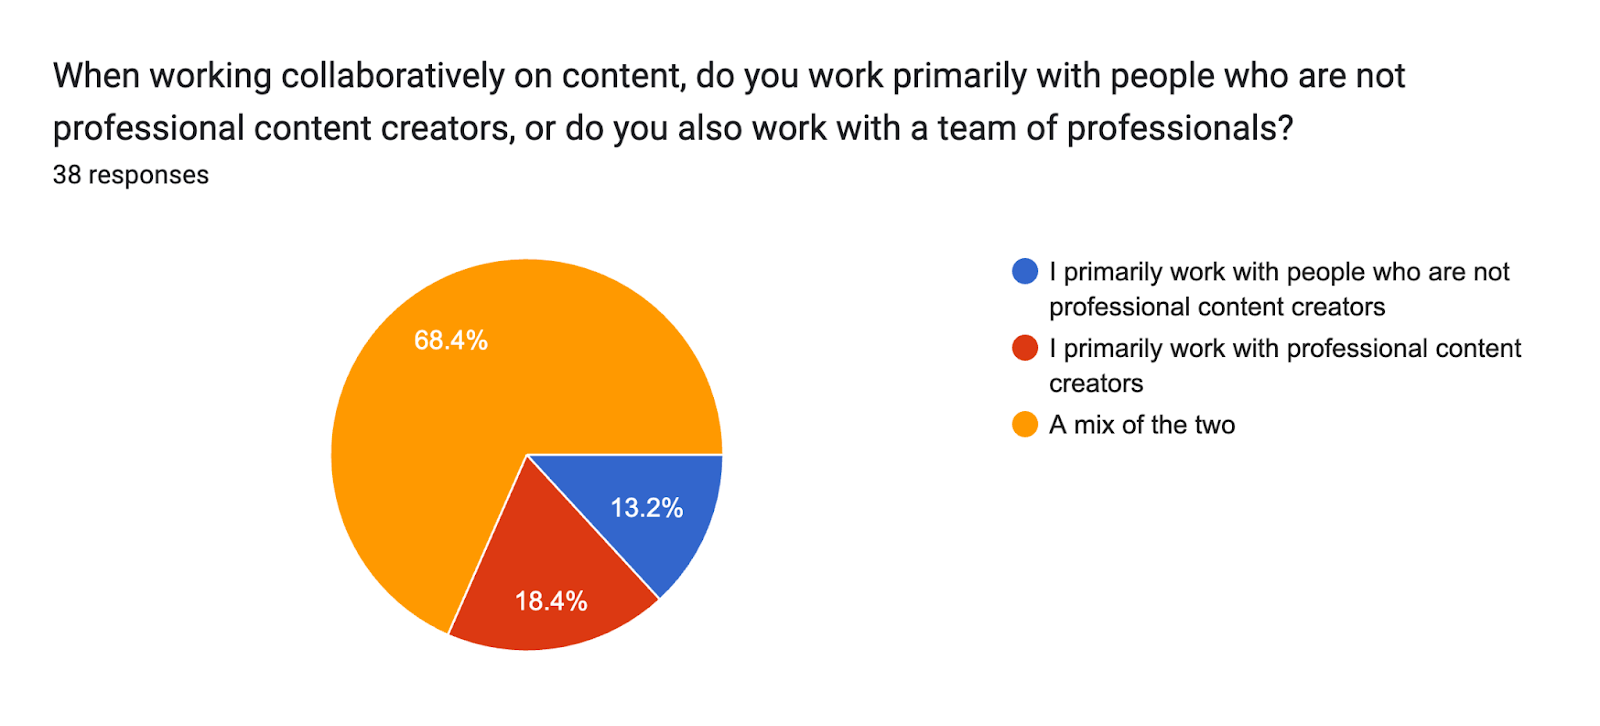 Blogs are alive and well, survey data shows